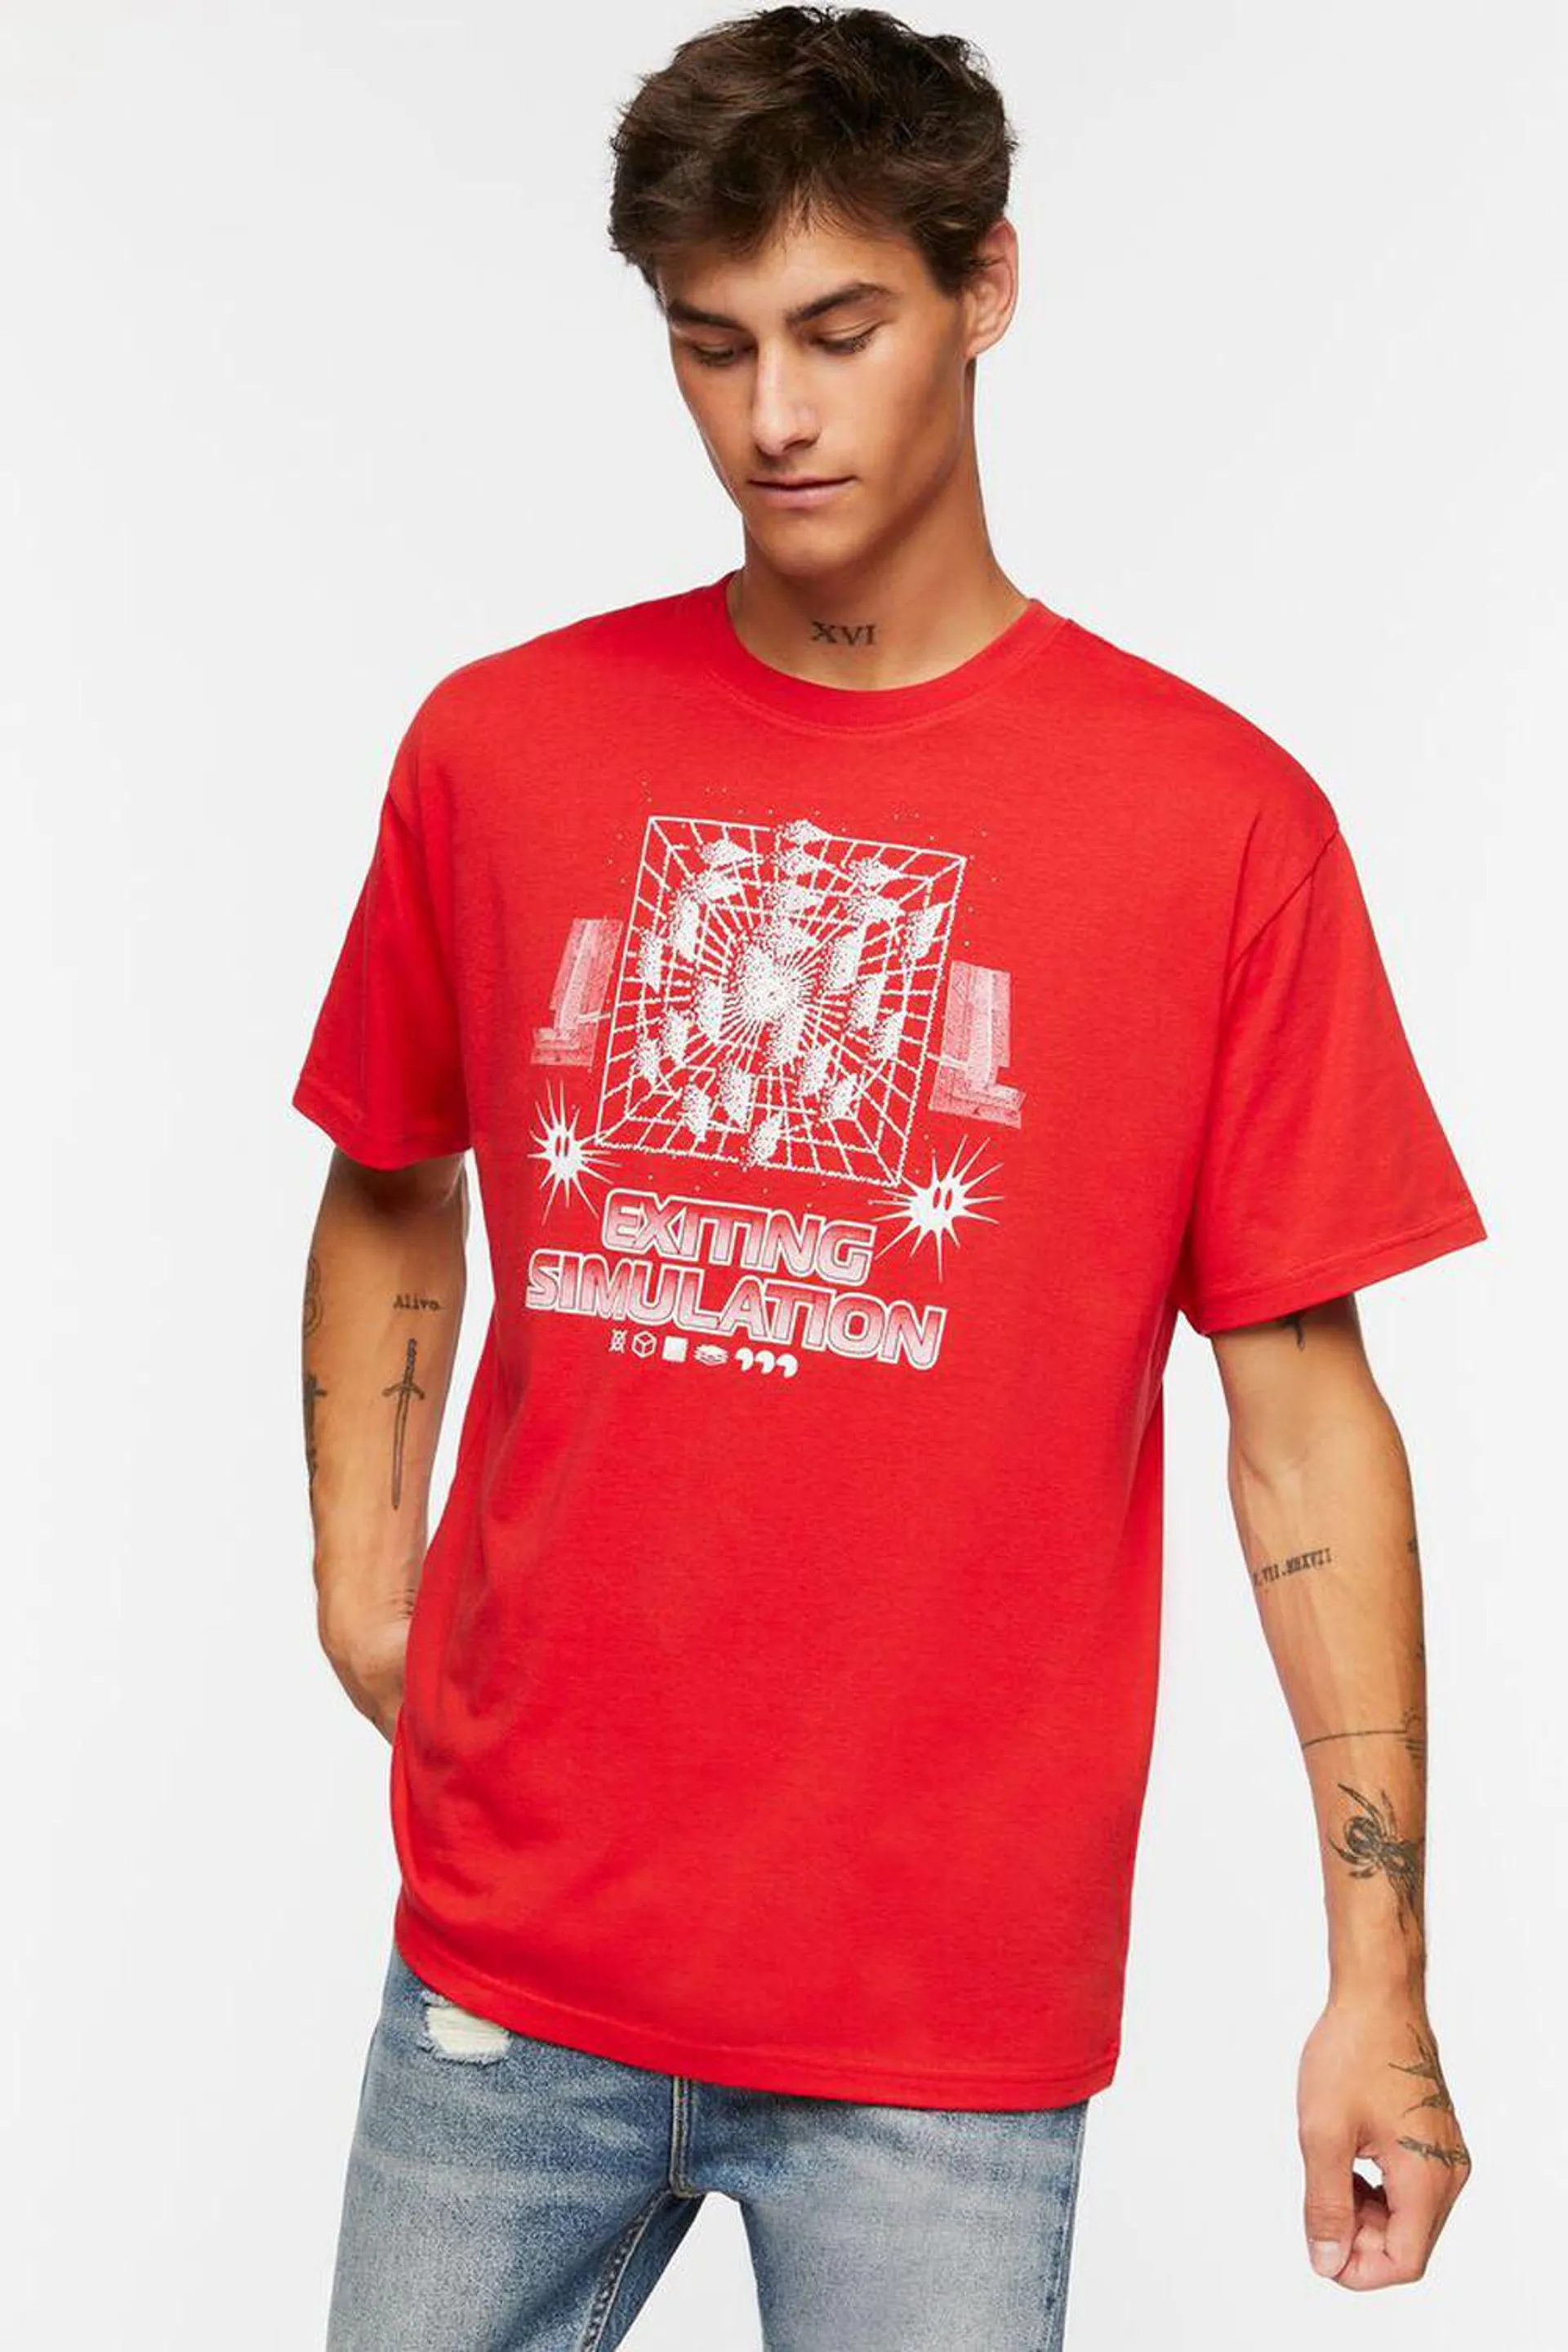 Exiting Simulation Graphic Tee